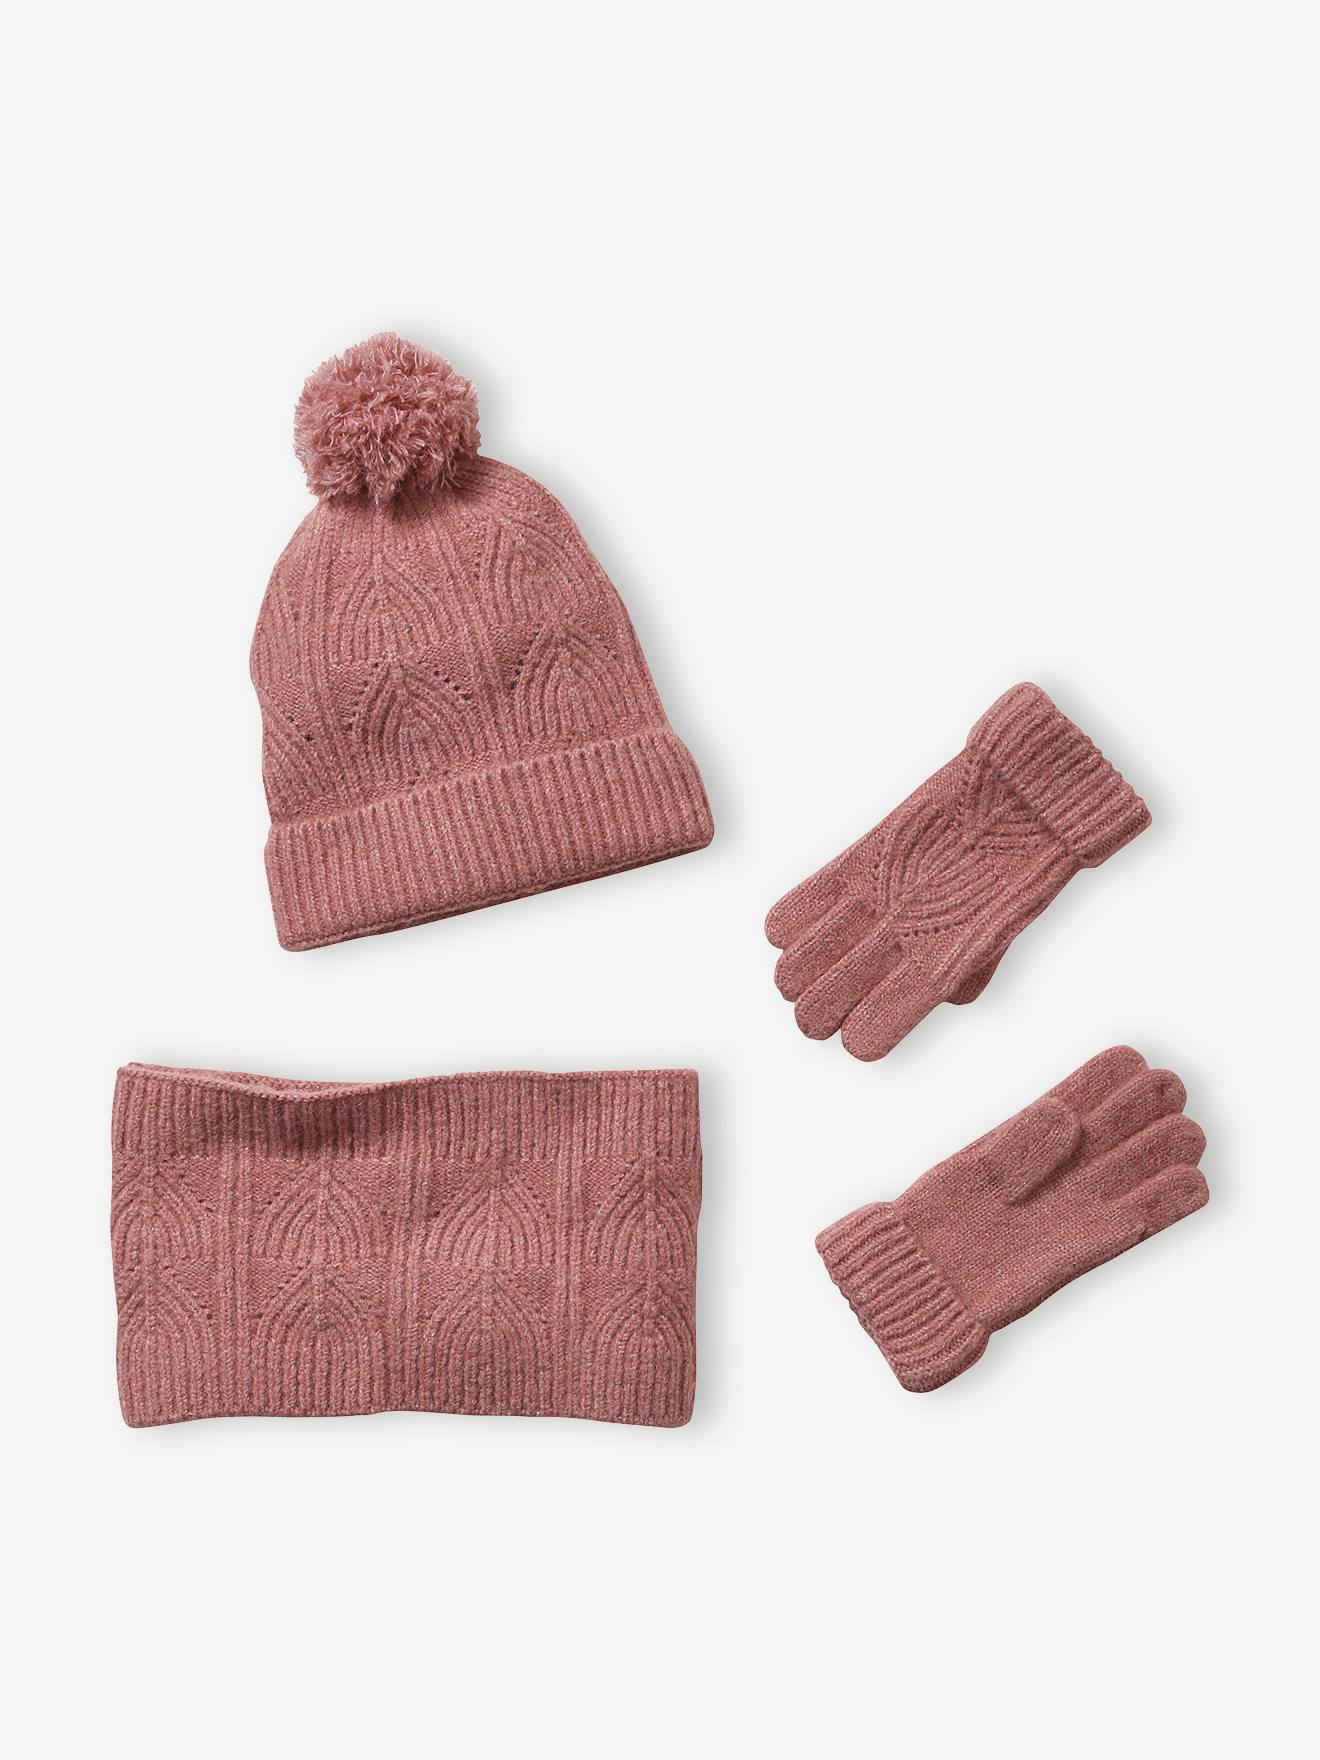 Beanie + Snood + Mittens Set in Shimmering Cable-Knit pink medium solid